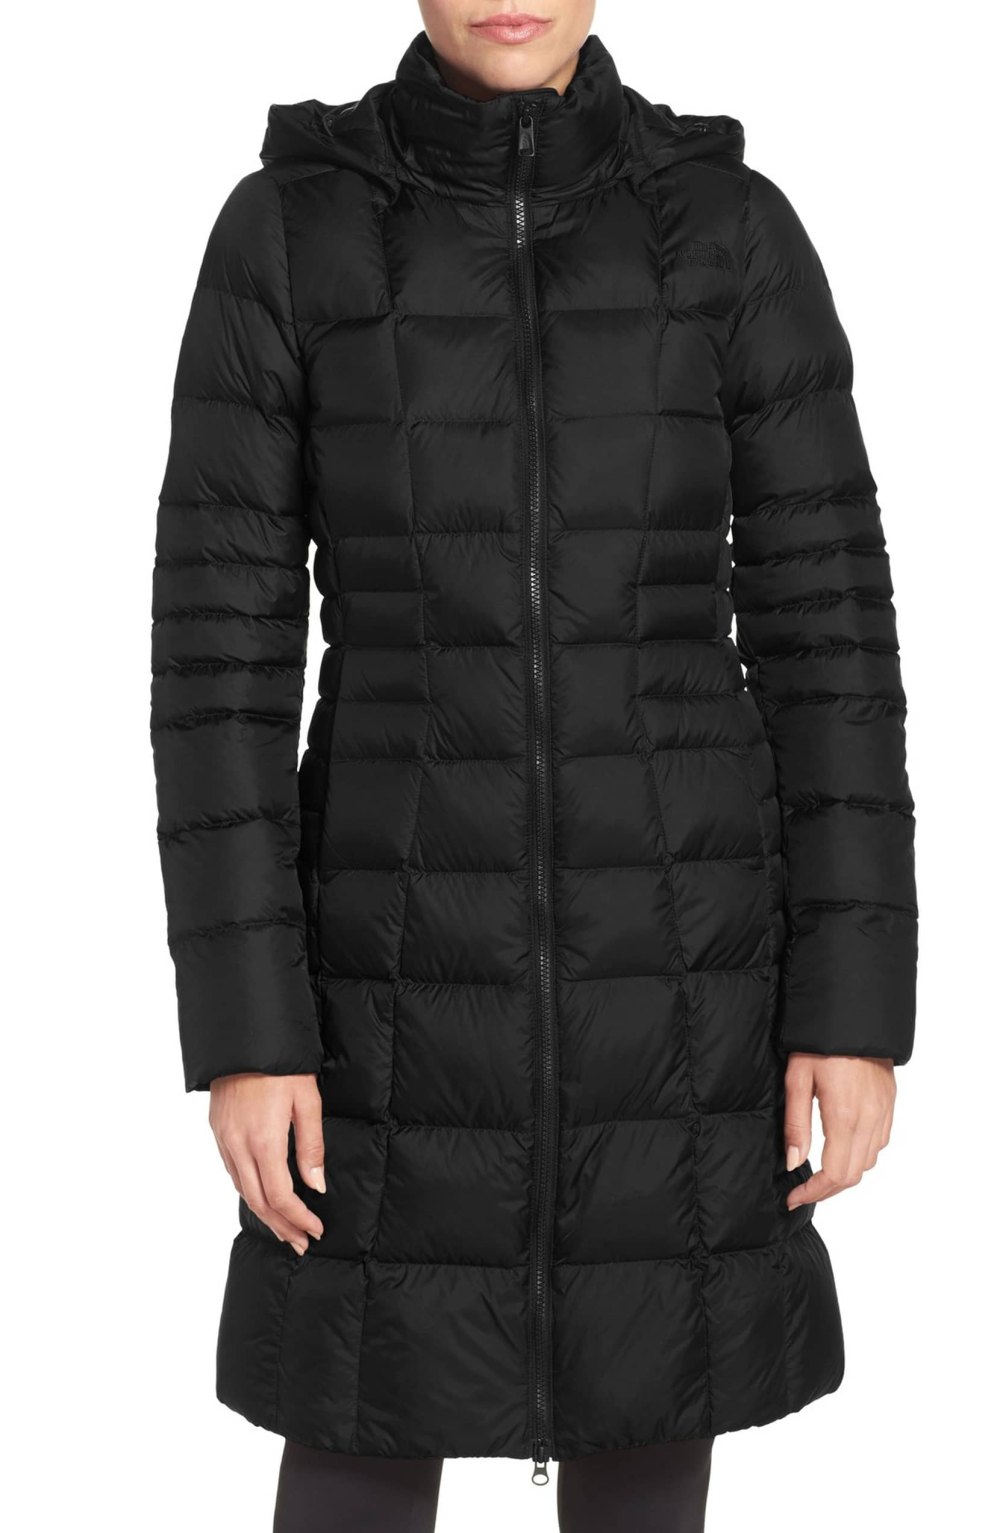 The North Face Metropolis II Hooded Water Resistant Down Parka